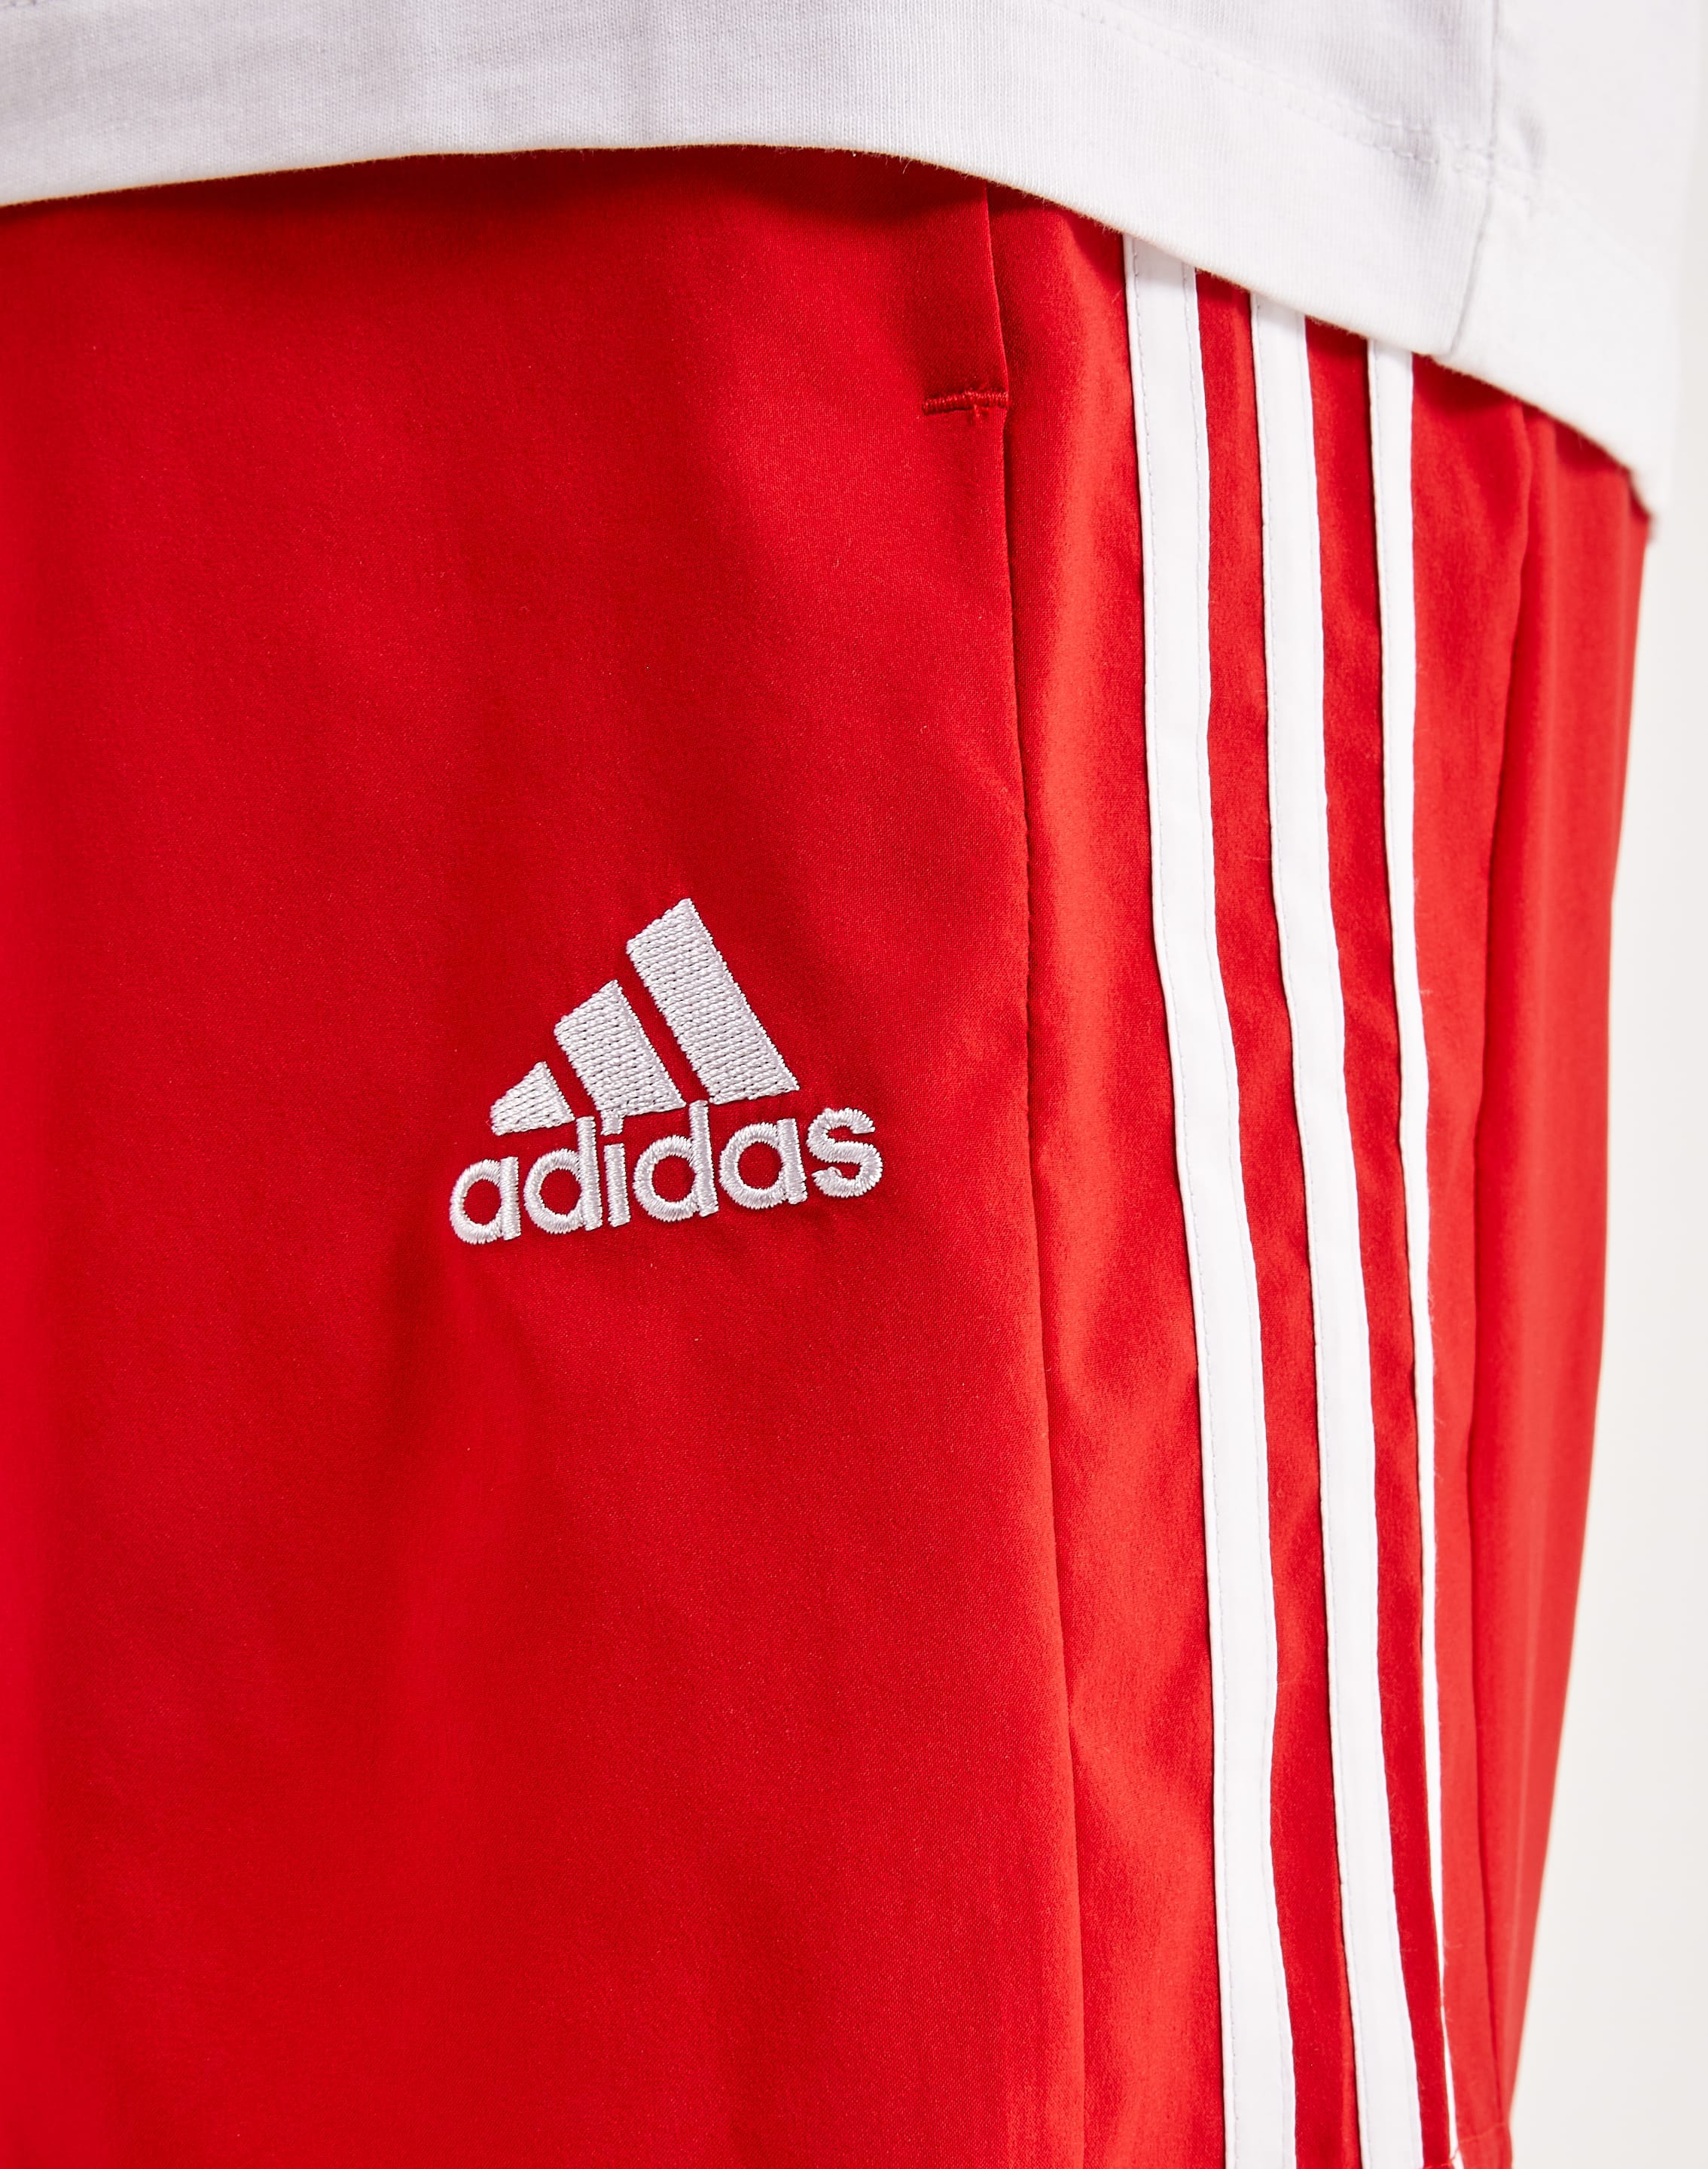 – Chelsea Shorts DTLR 3-Stripes Adidas